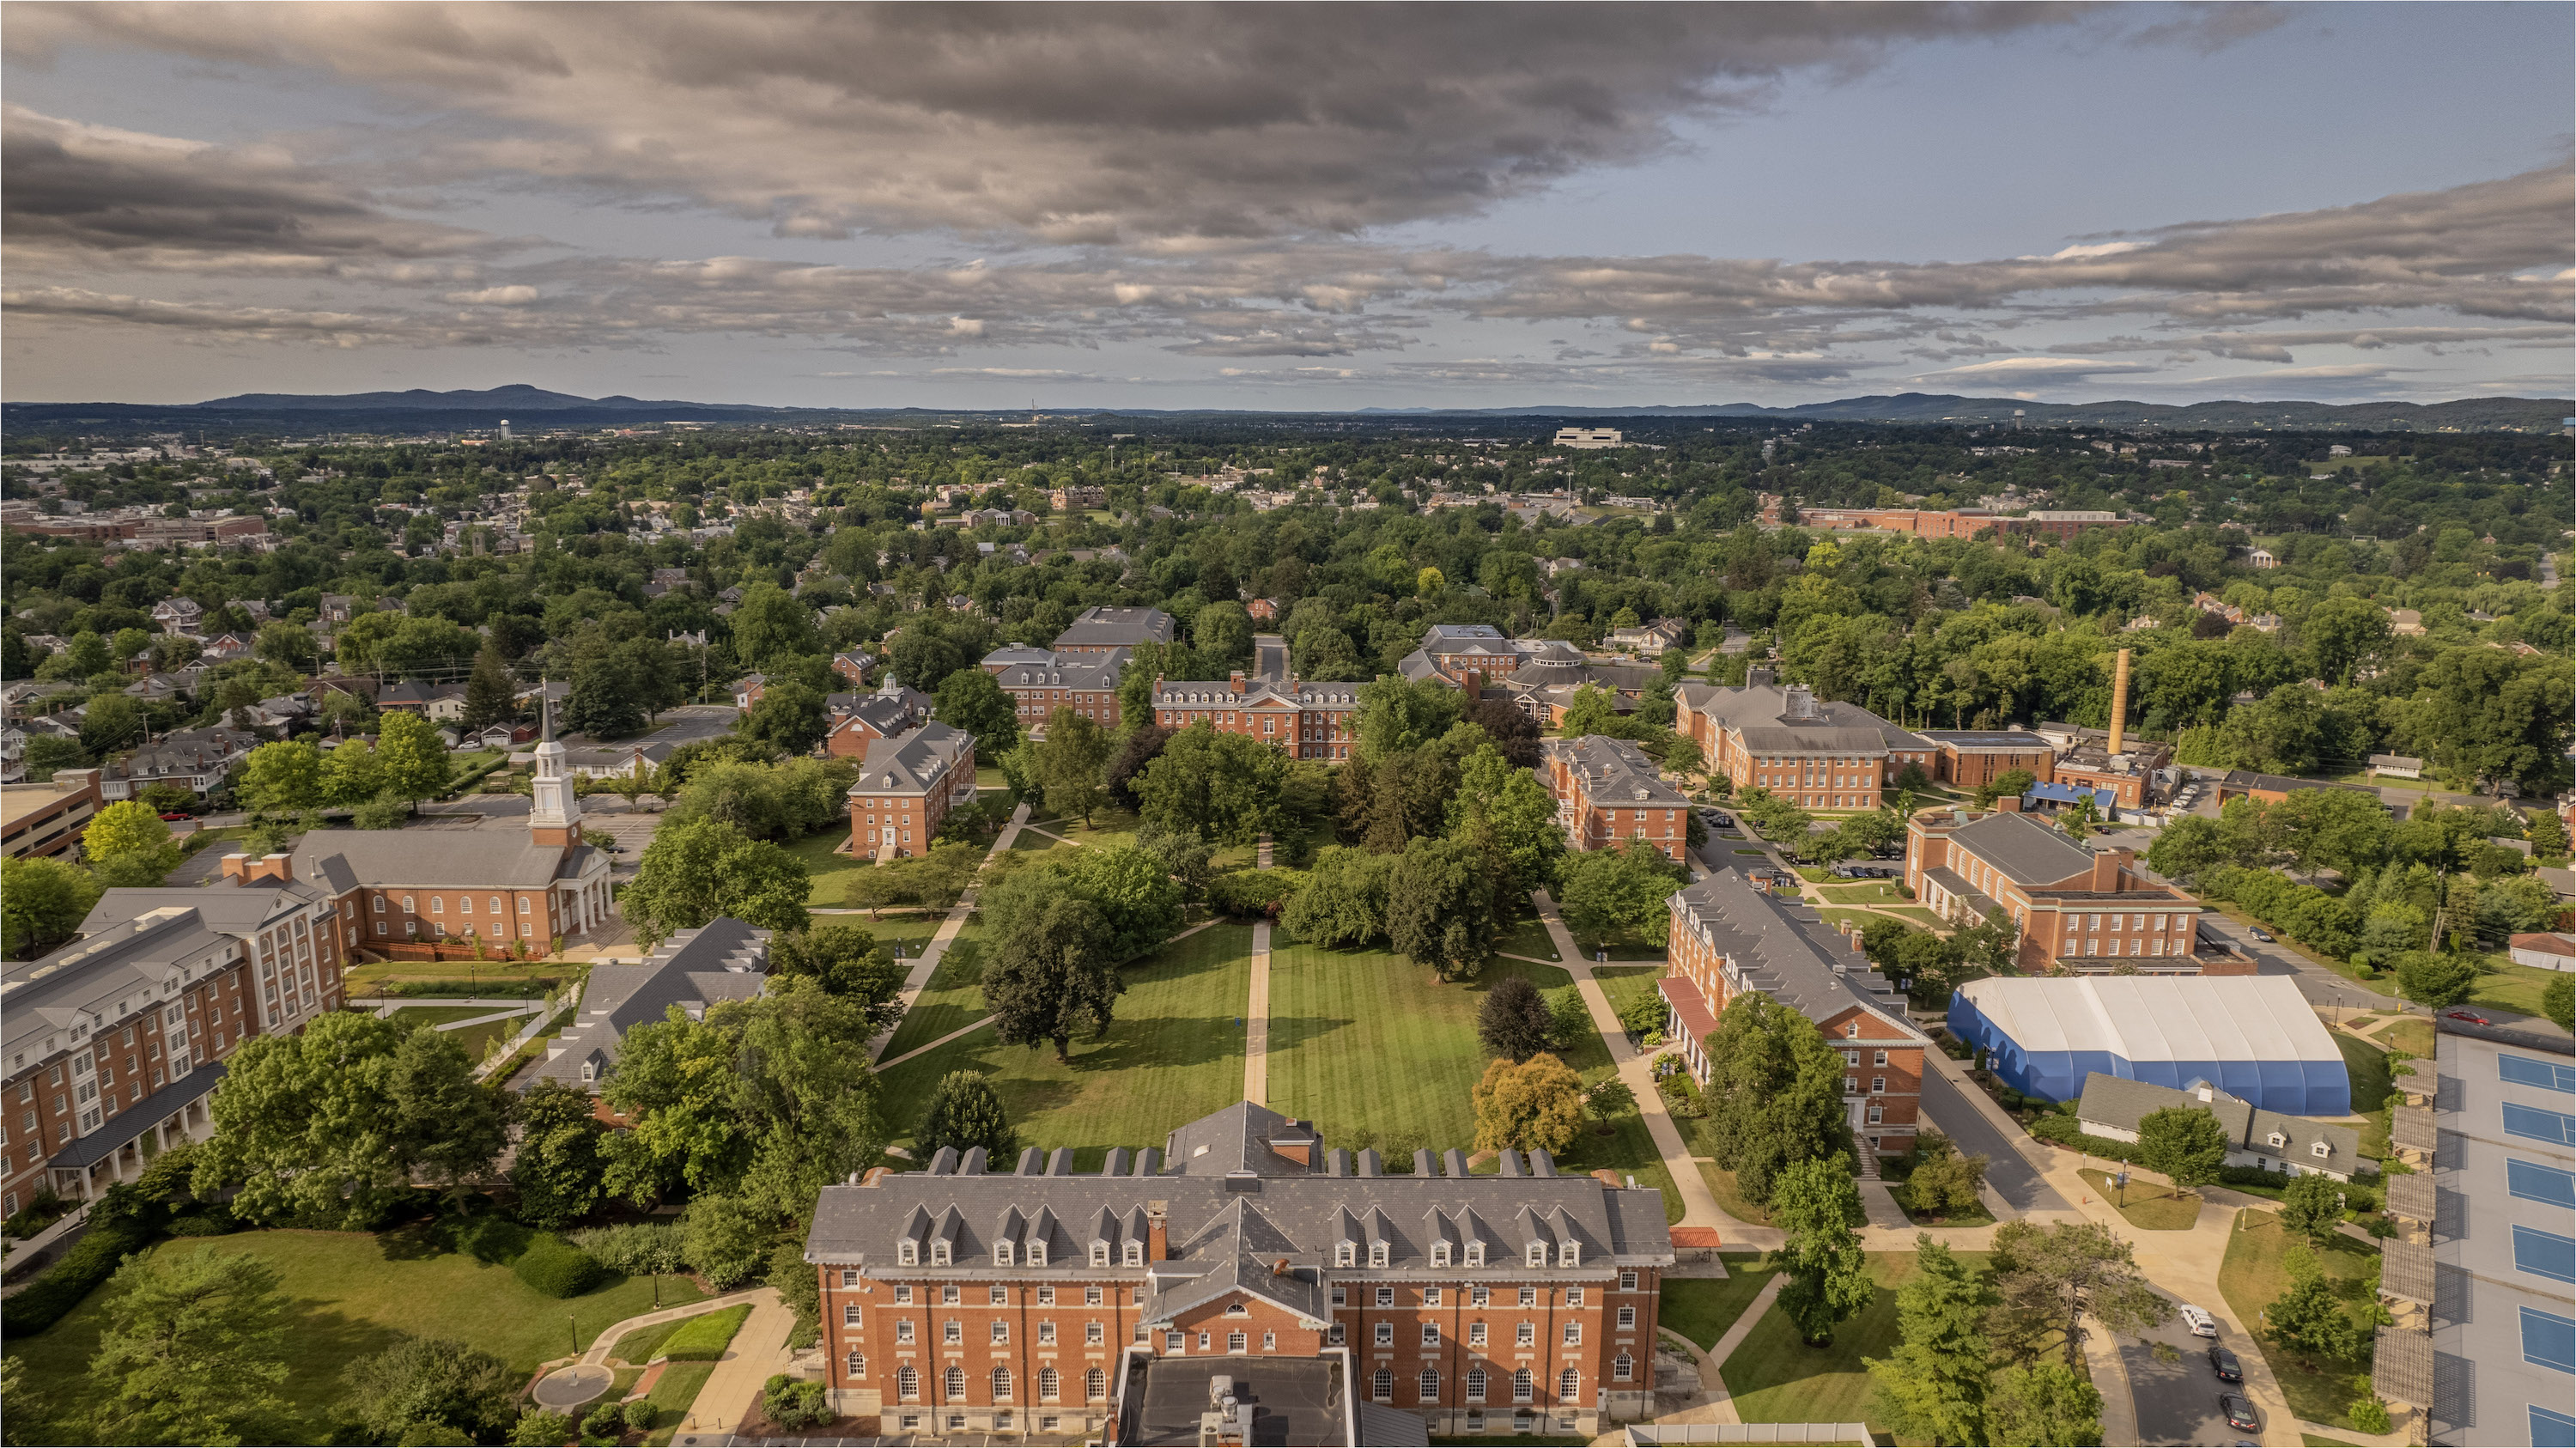 A drone shot of the Hood College Quadrangle from behind Coblentz Hall